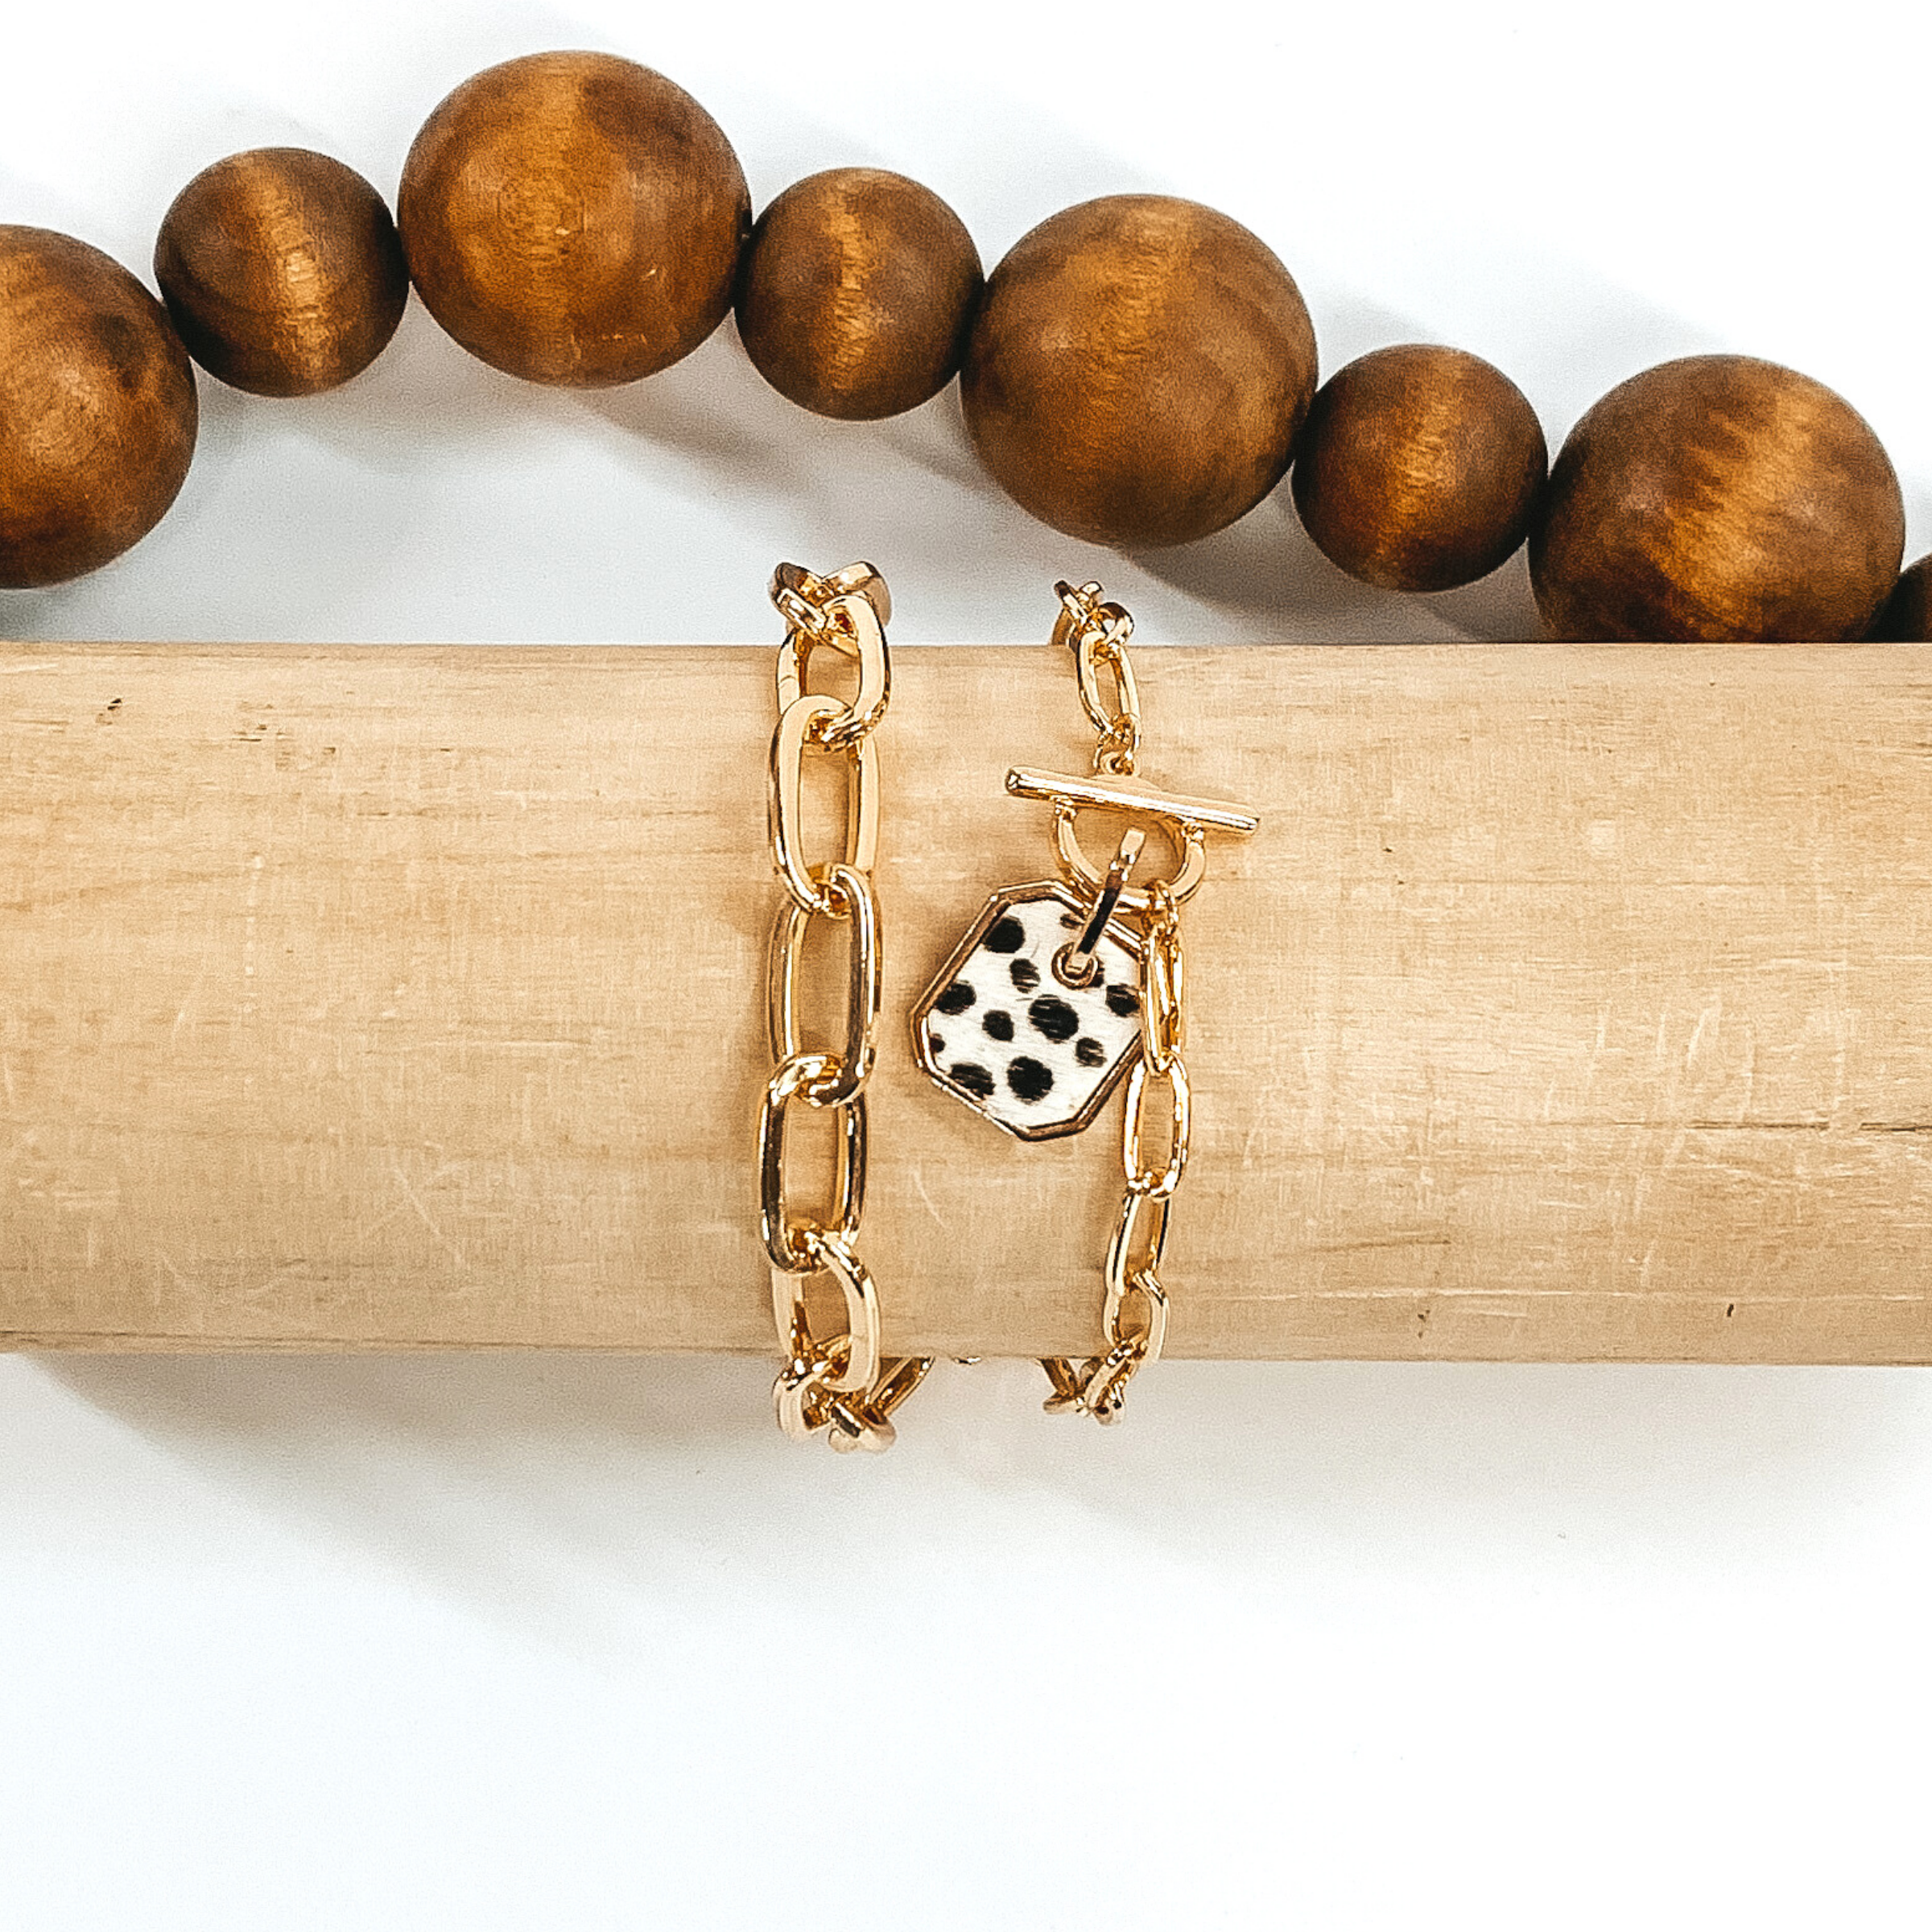 Gold two chained bracelet with an octagon pendant with a white hide inlay with a black dotted print. this bracelet is pictured on a light tan bracelet holder on a white background with brown beads in the background. 